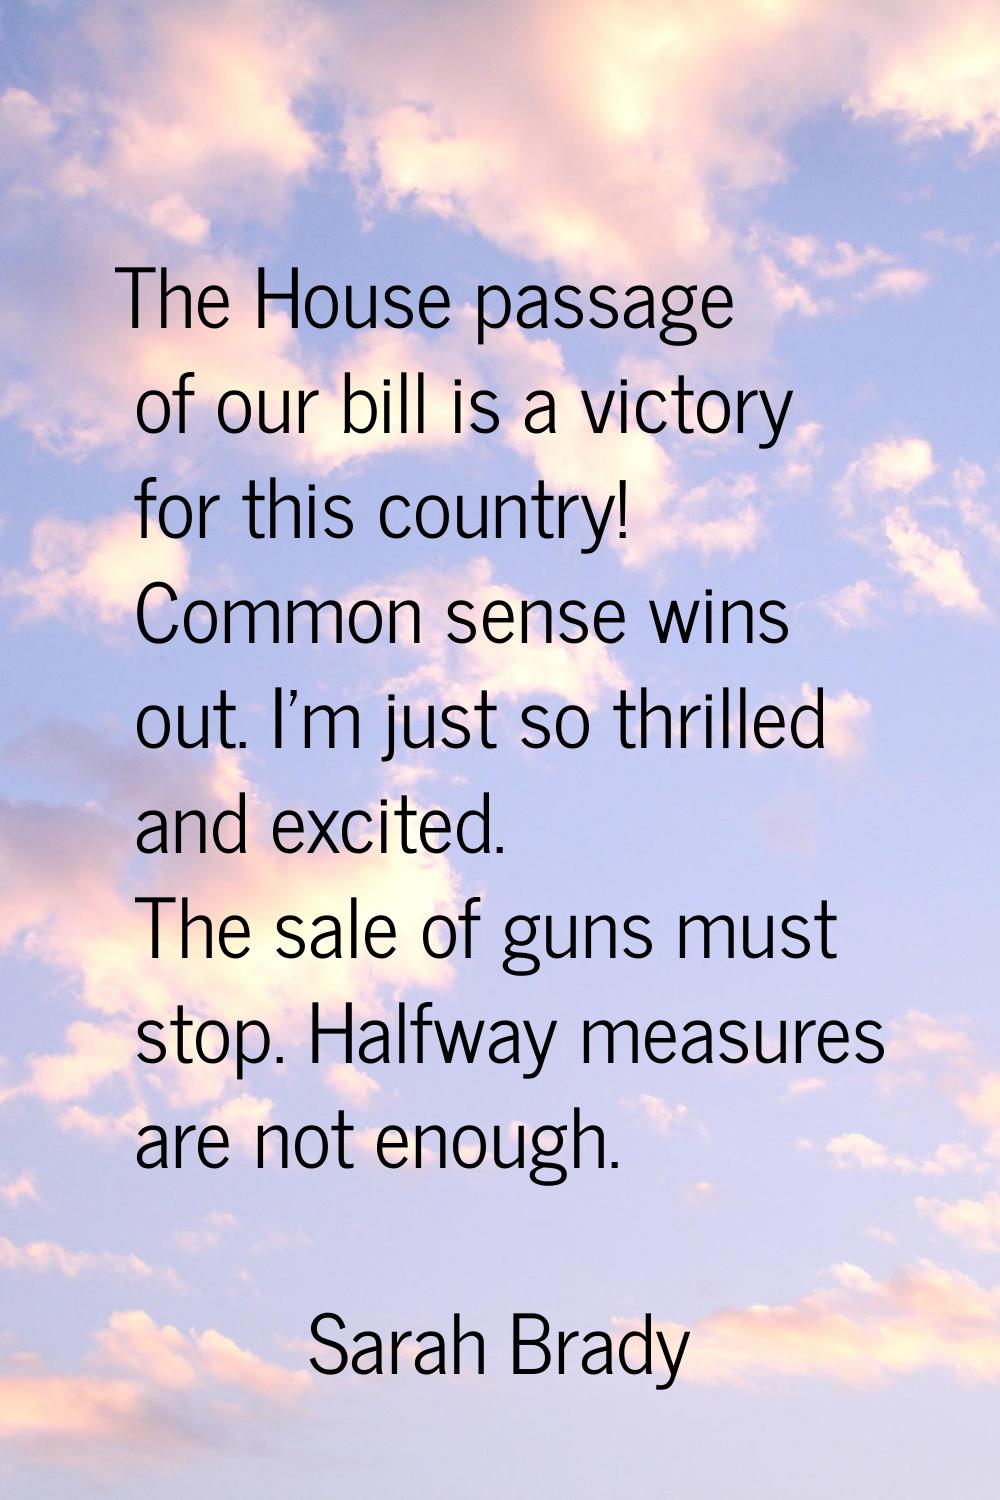 The House passage of our bill is a victory for this country! Common sense wins out. I'm just so thr